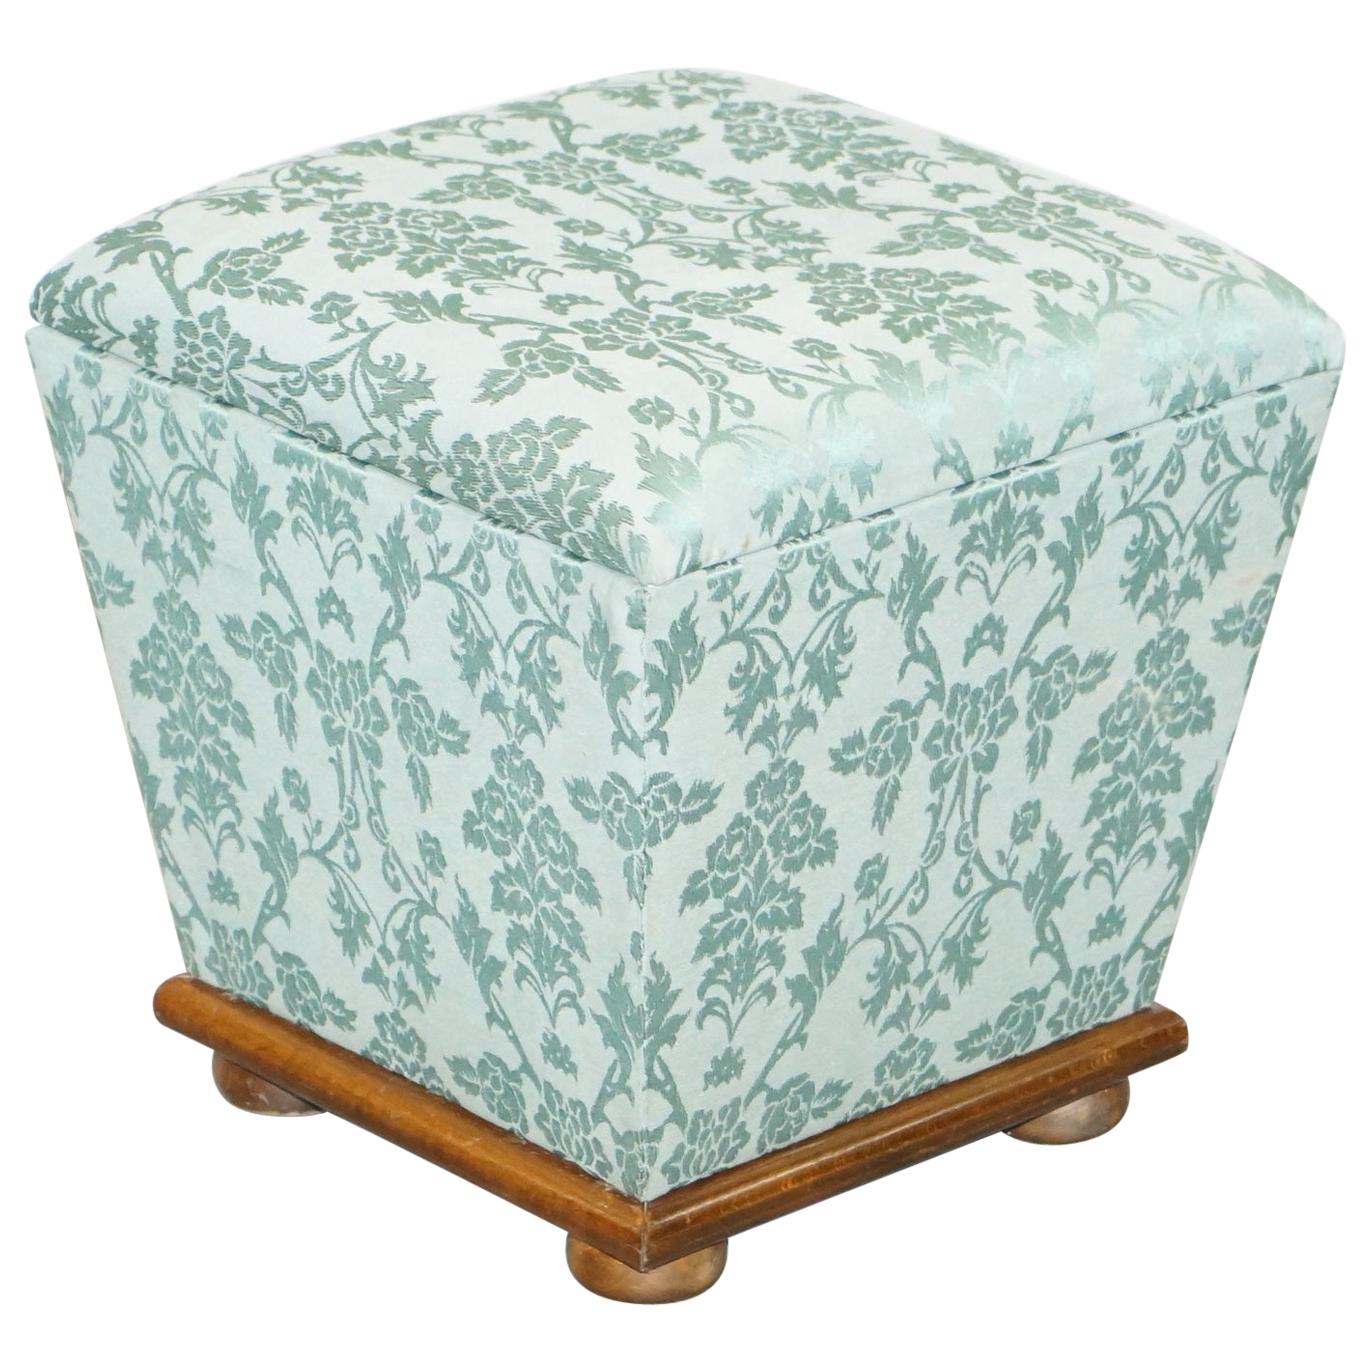 Exquisite Silk Upholstered Victorian Style Ottoman Stool Footstool with Storage